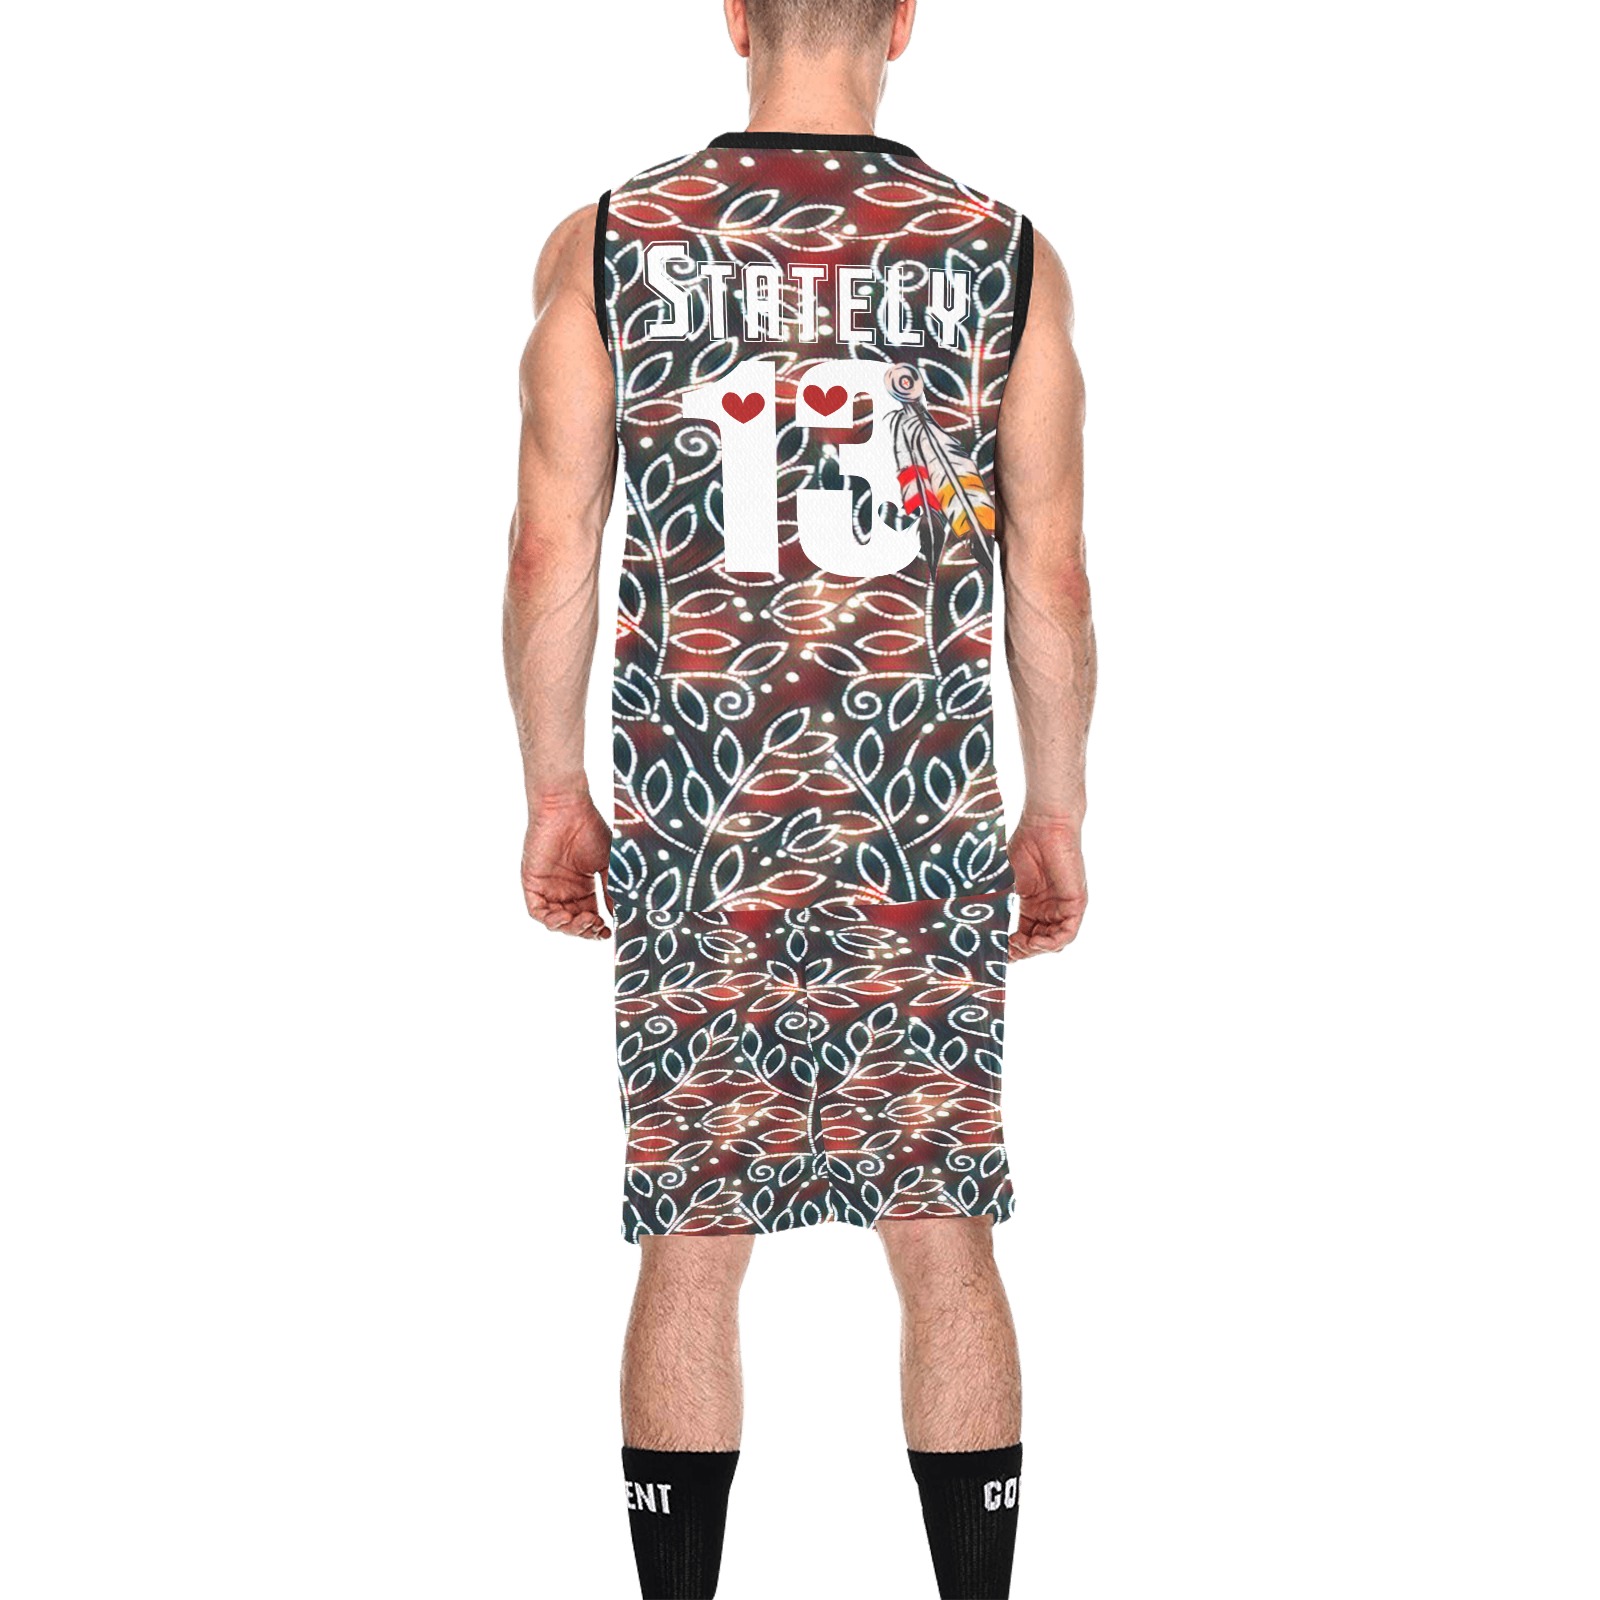 Stately 13 All Over Print Basketball Uniform